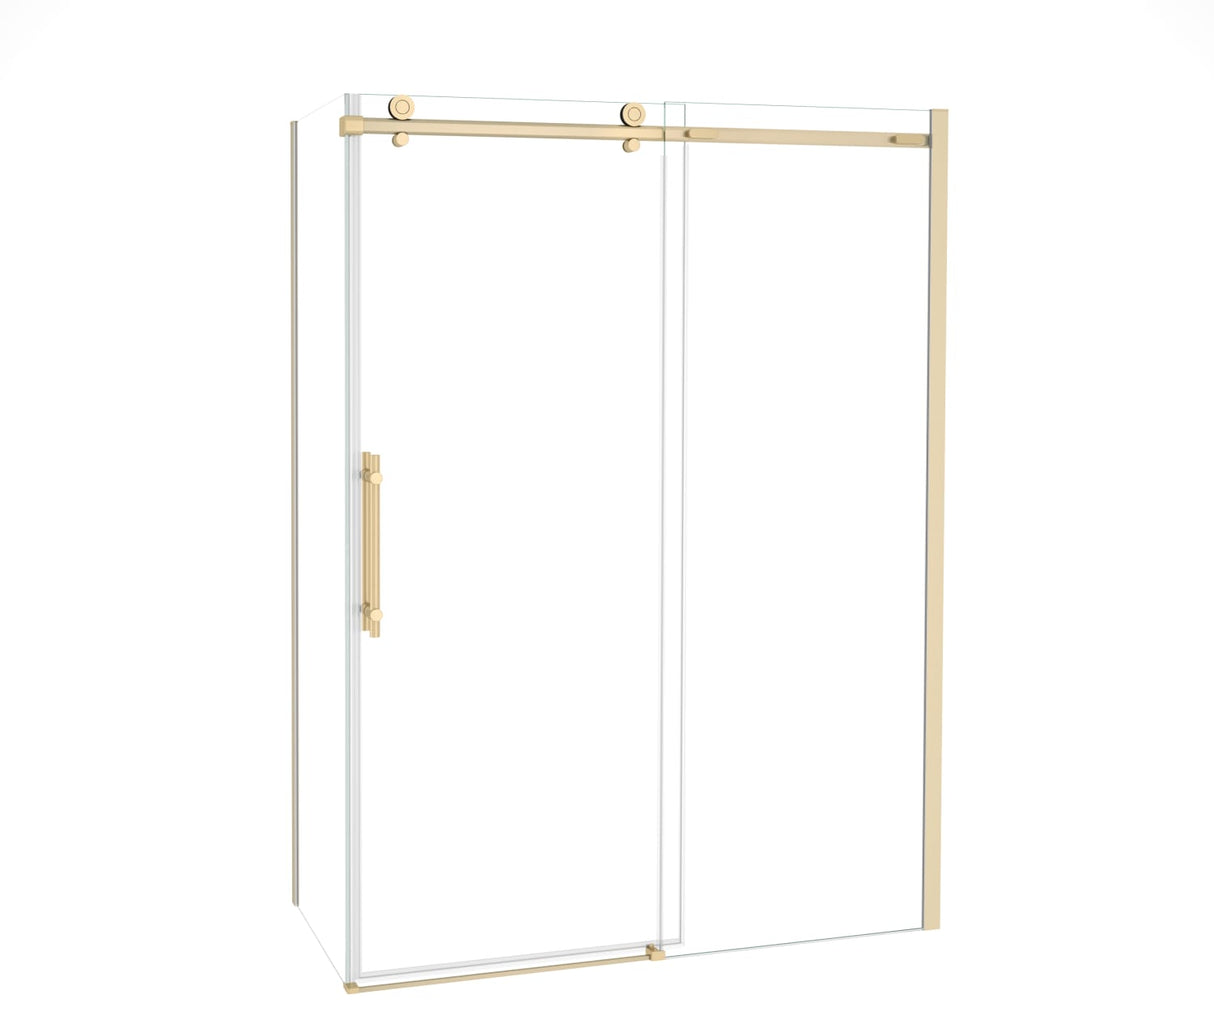 MAAX 107546-900-343-000 Odyssey SC 60" x 32" x 78" 8mm Sliding Shower Door for Corner Installation with Clear glass in Brushed Gold